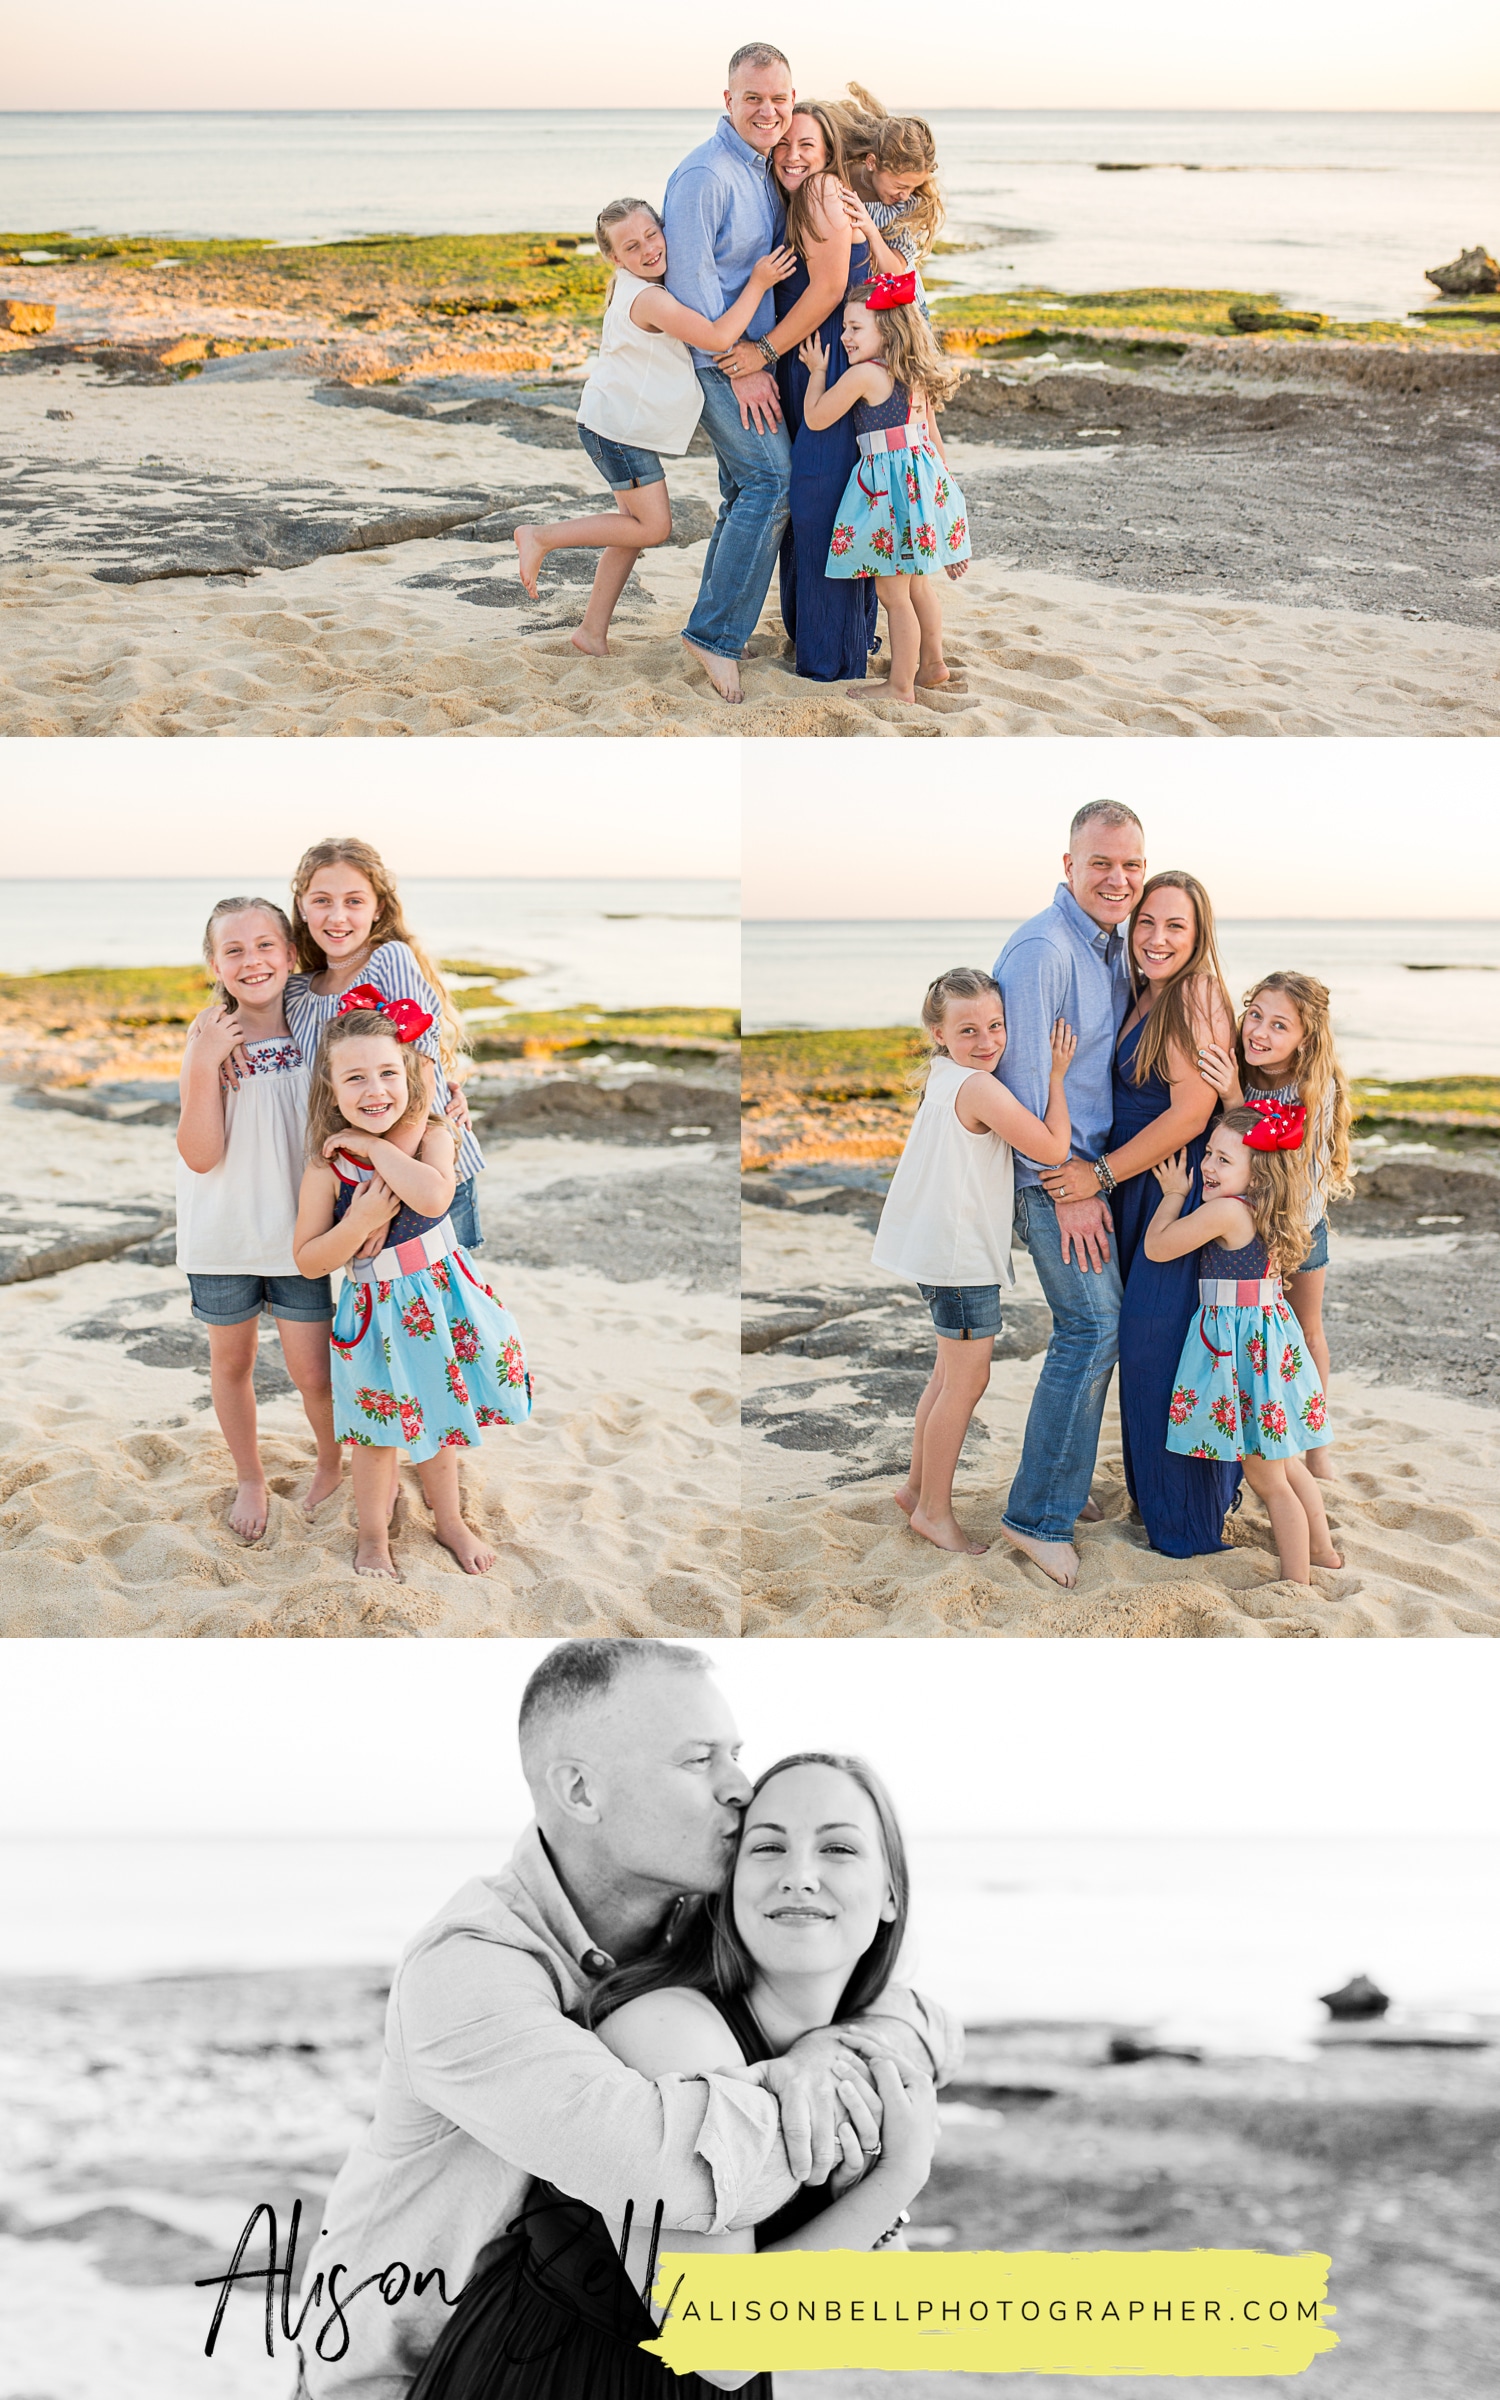 Half Priced Mini Sessions by Family Photographer Alison Bell, Photographer. Alisonbellphotographer.com